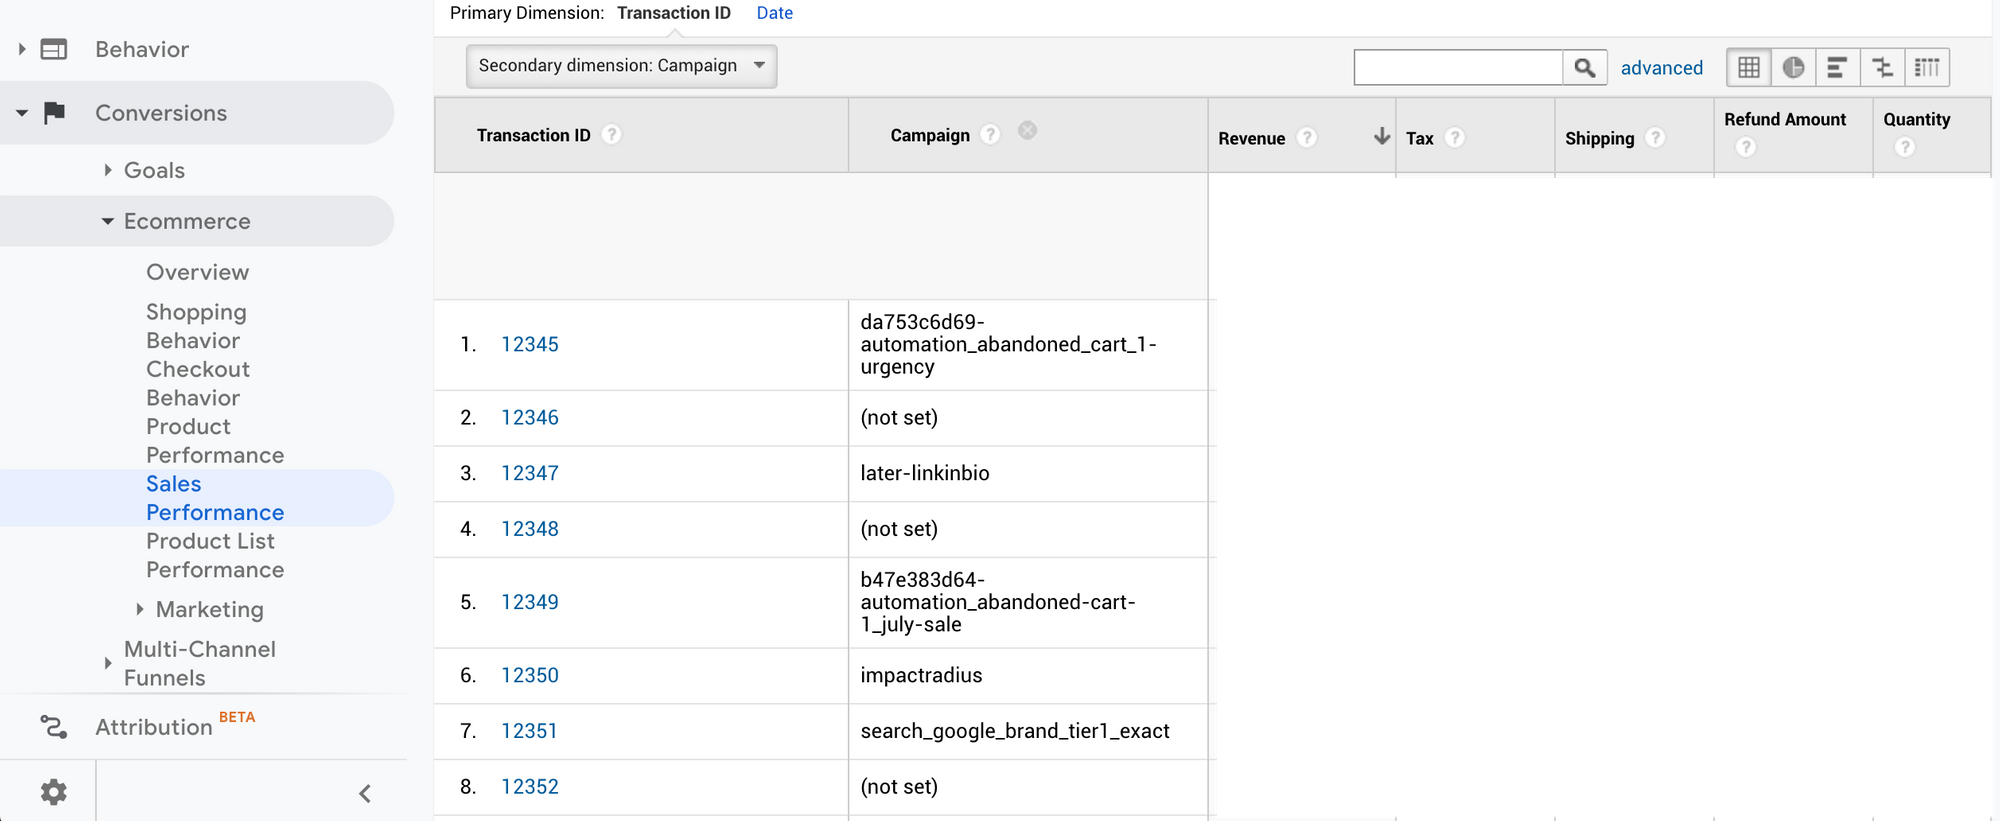 Using Secondary dimensions to combine Transaction ID with Campaign source values in GA